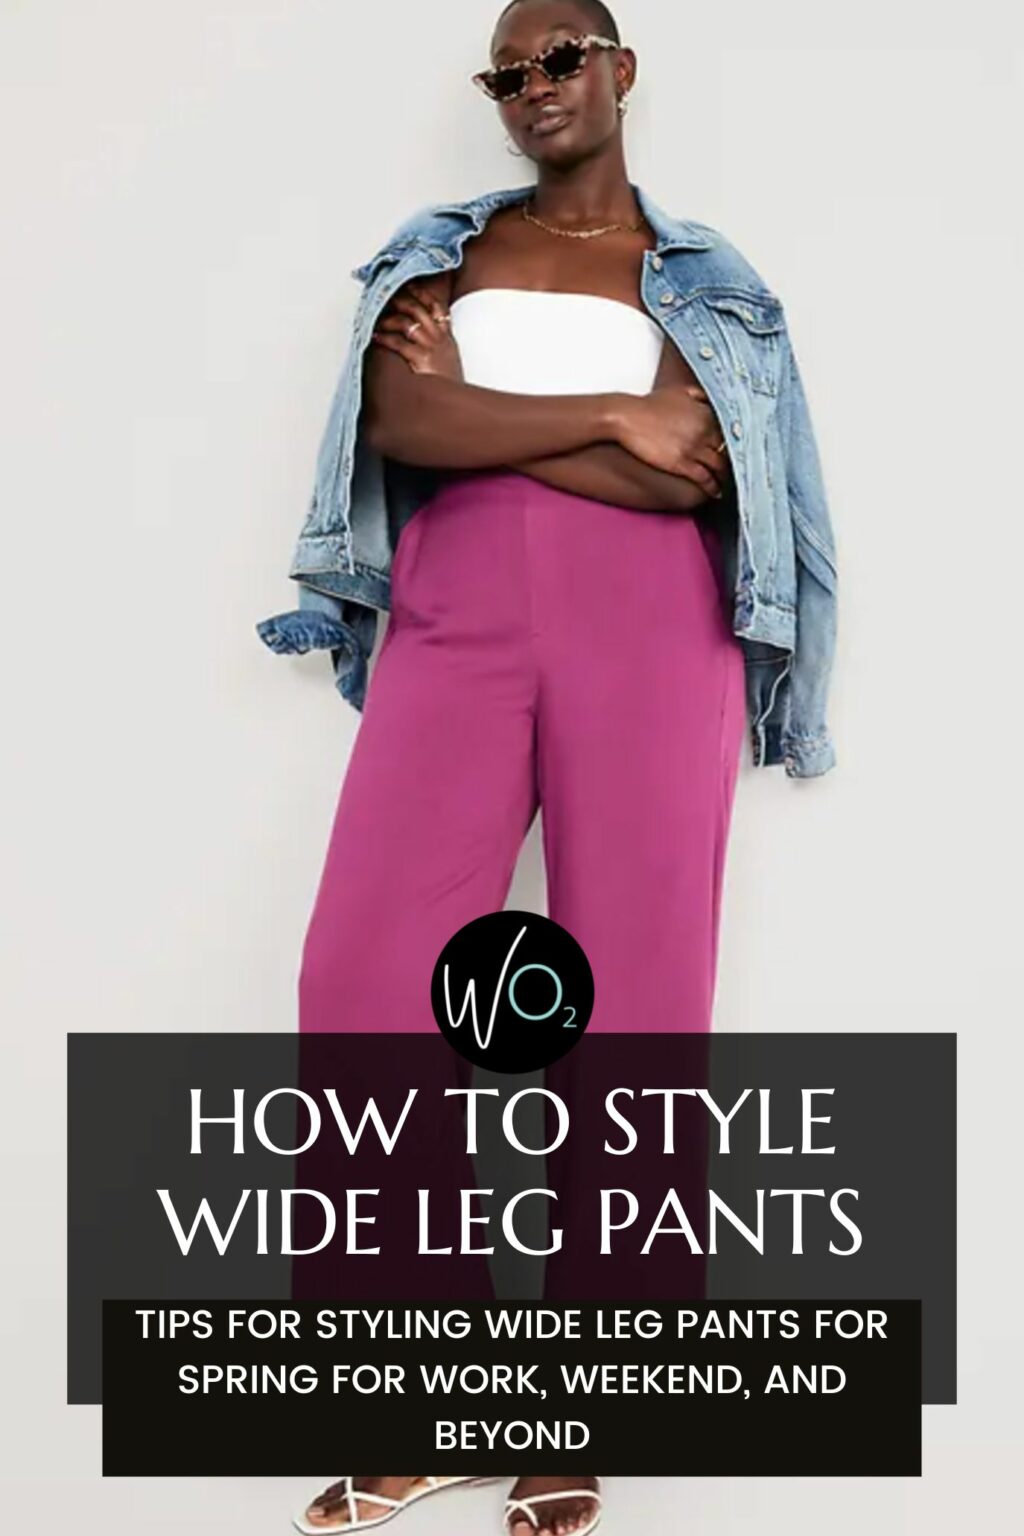 How to Style Wide Leg Pants as a Grown Woman